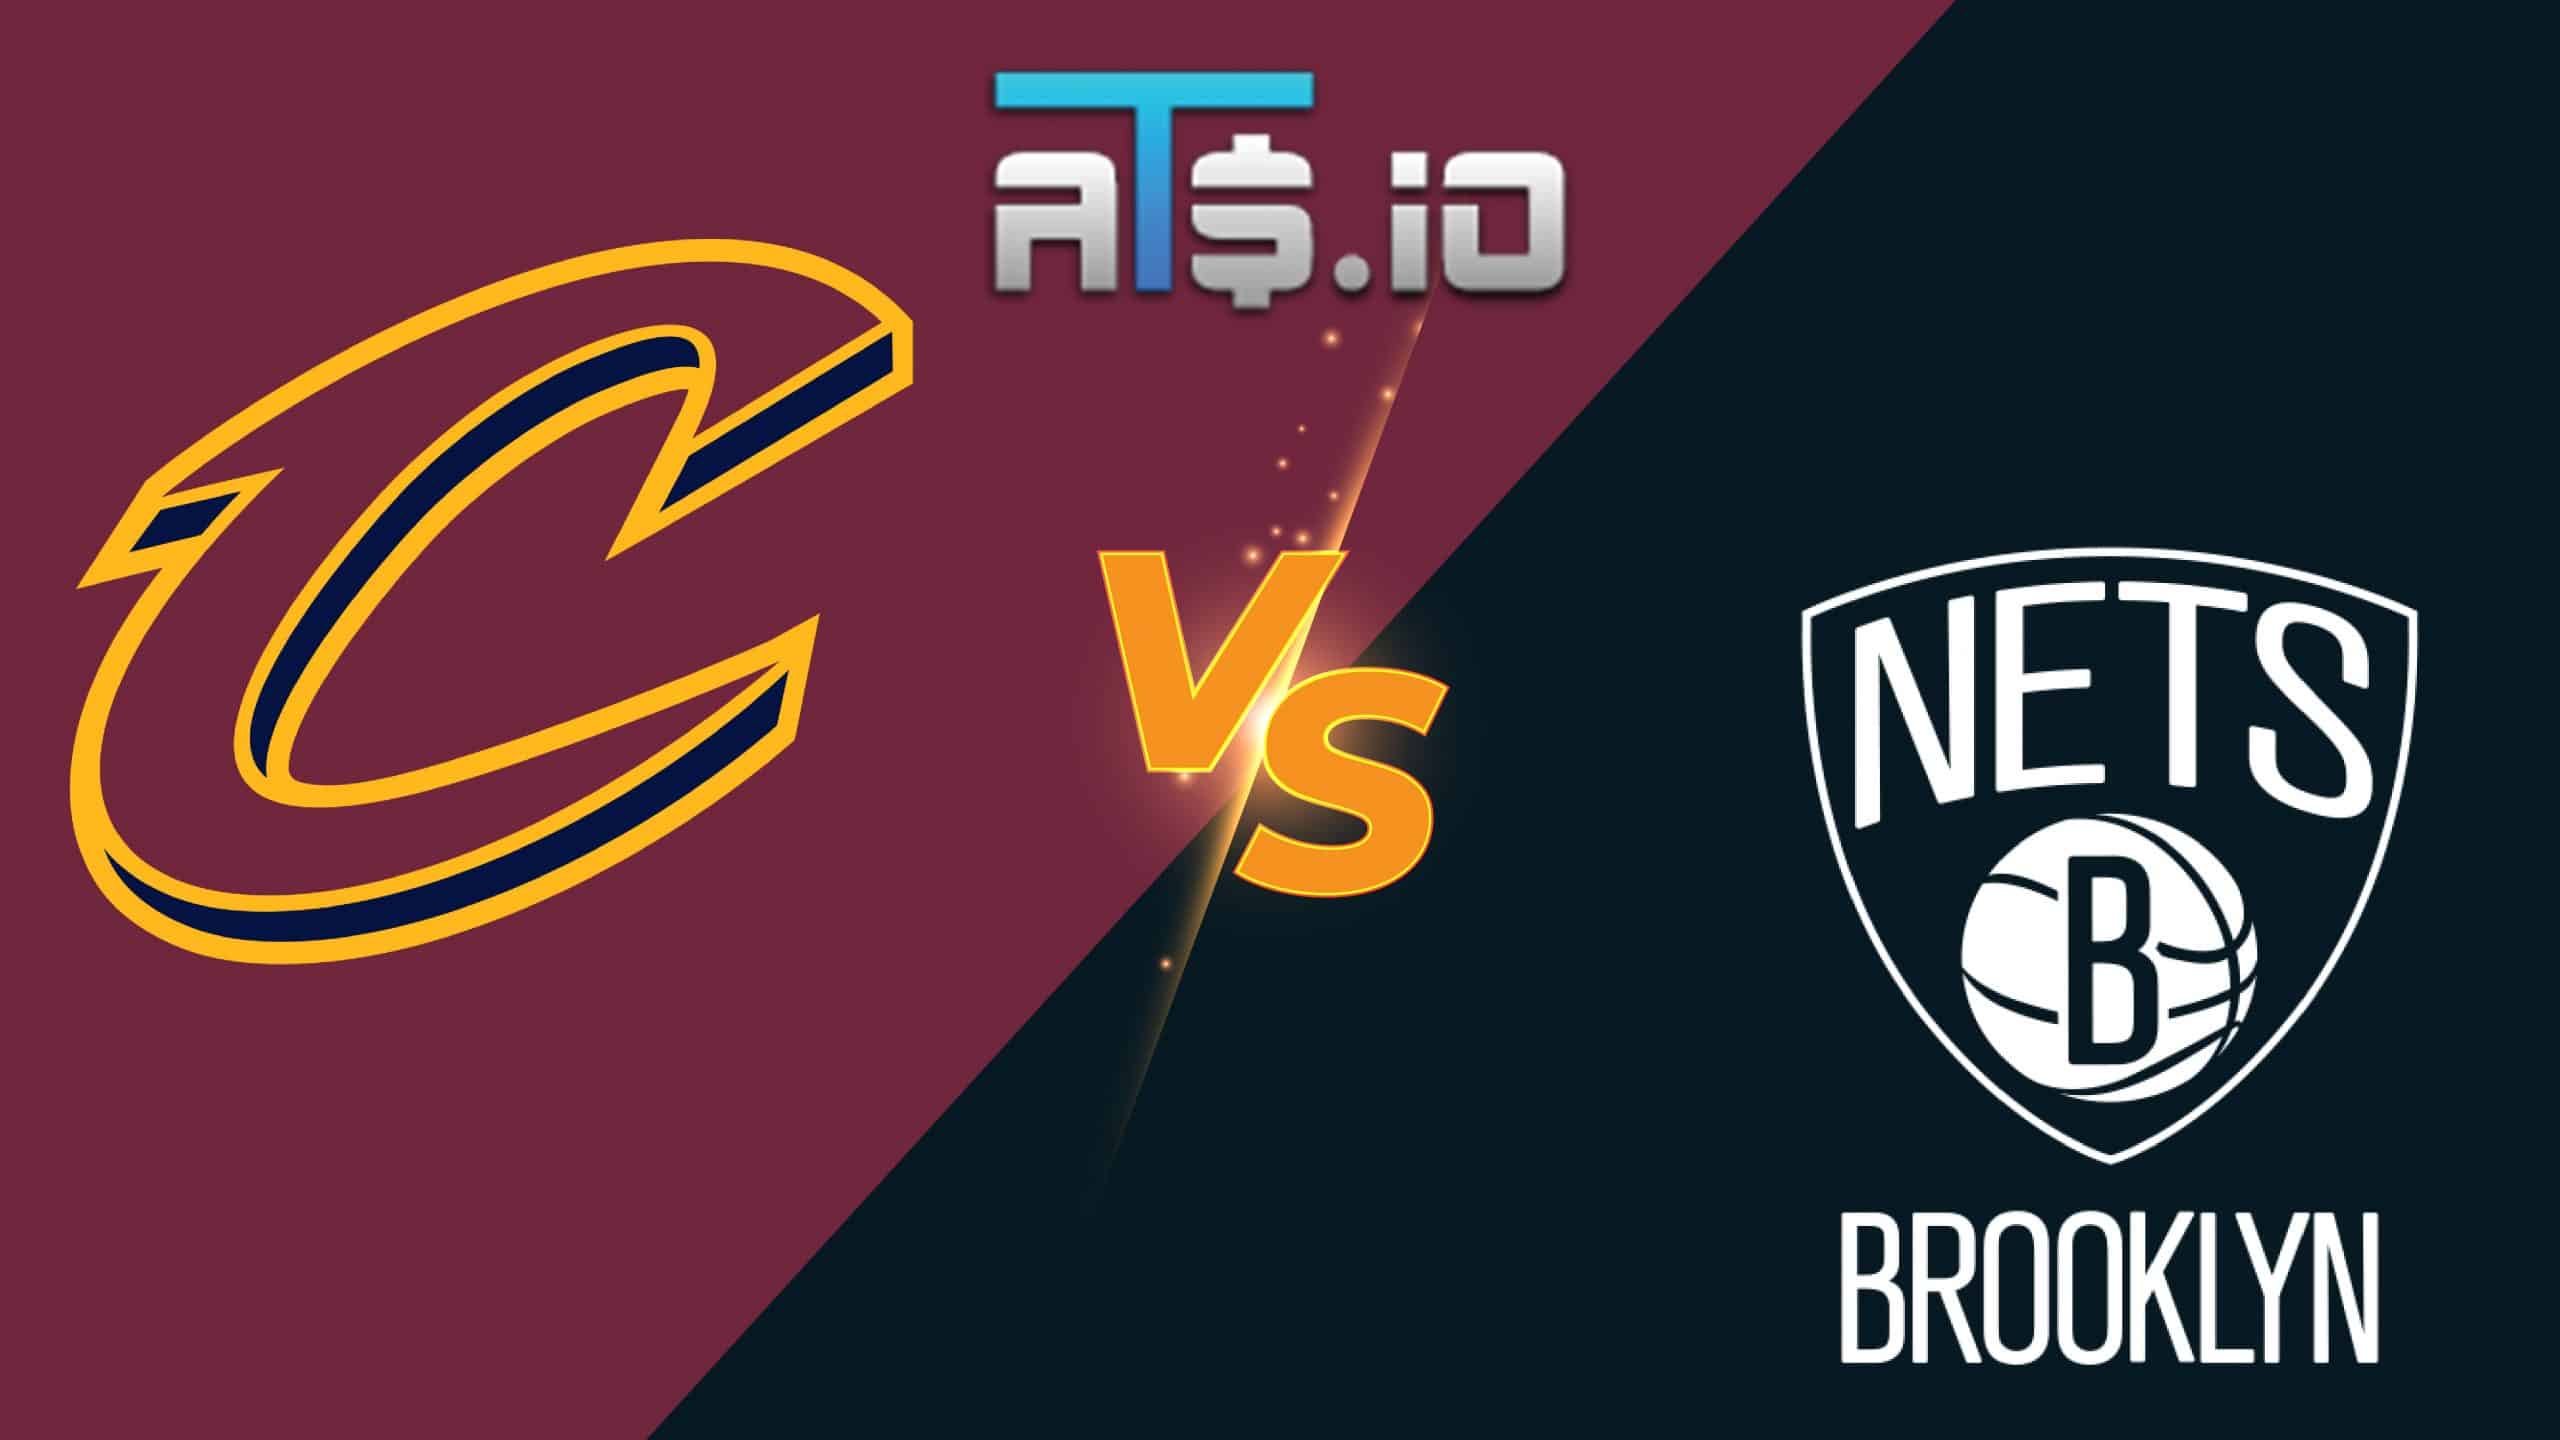 Cleveland Cavaliers vs Brooklyn Nets Play-In Pick & Prediction 4/12/22